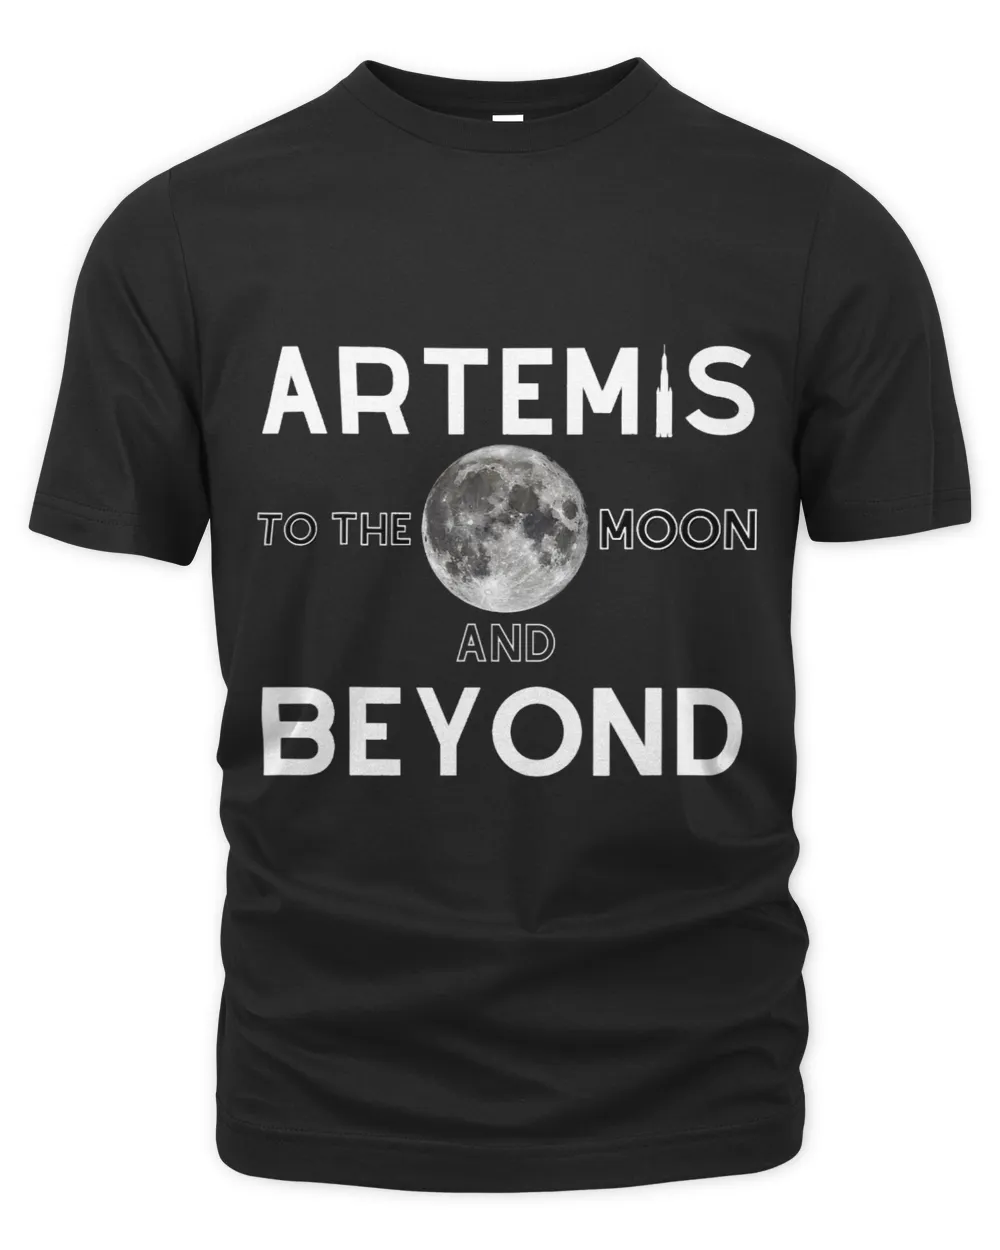 Artemis 1 SLS Rocket Launch Mission To The Moon And Beyond